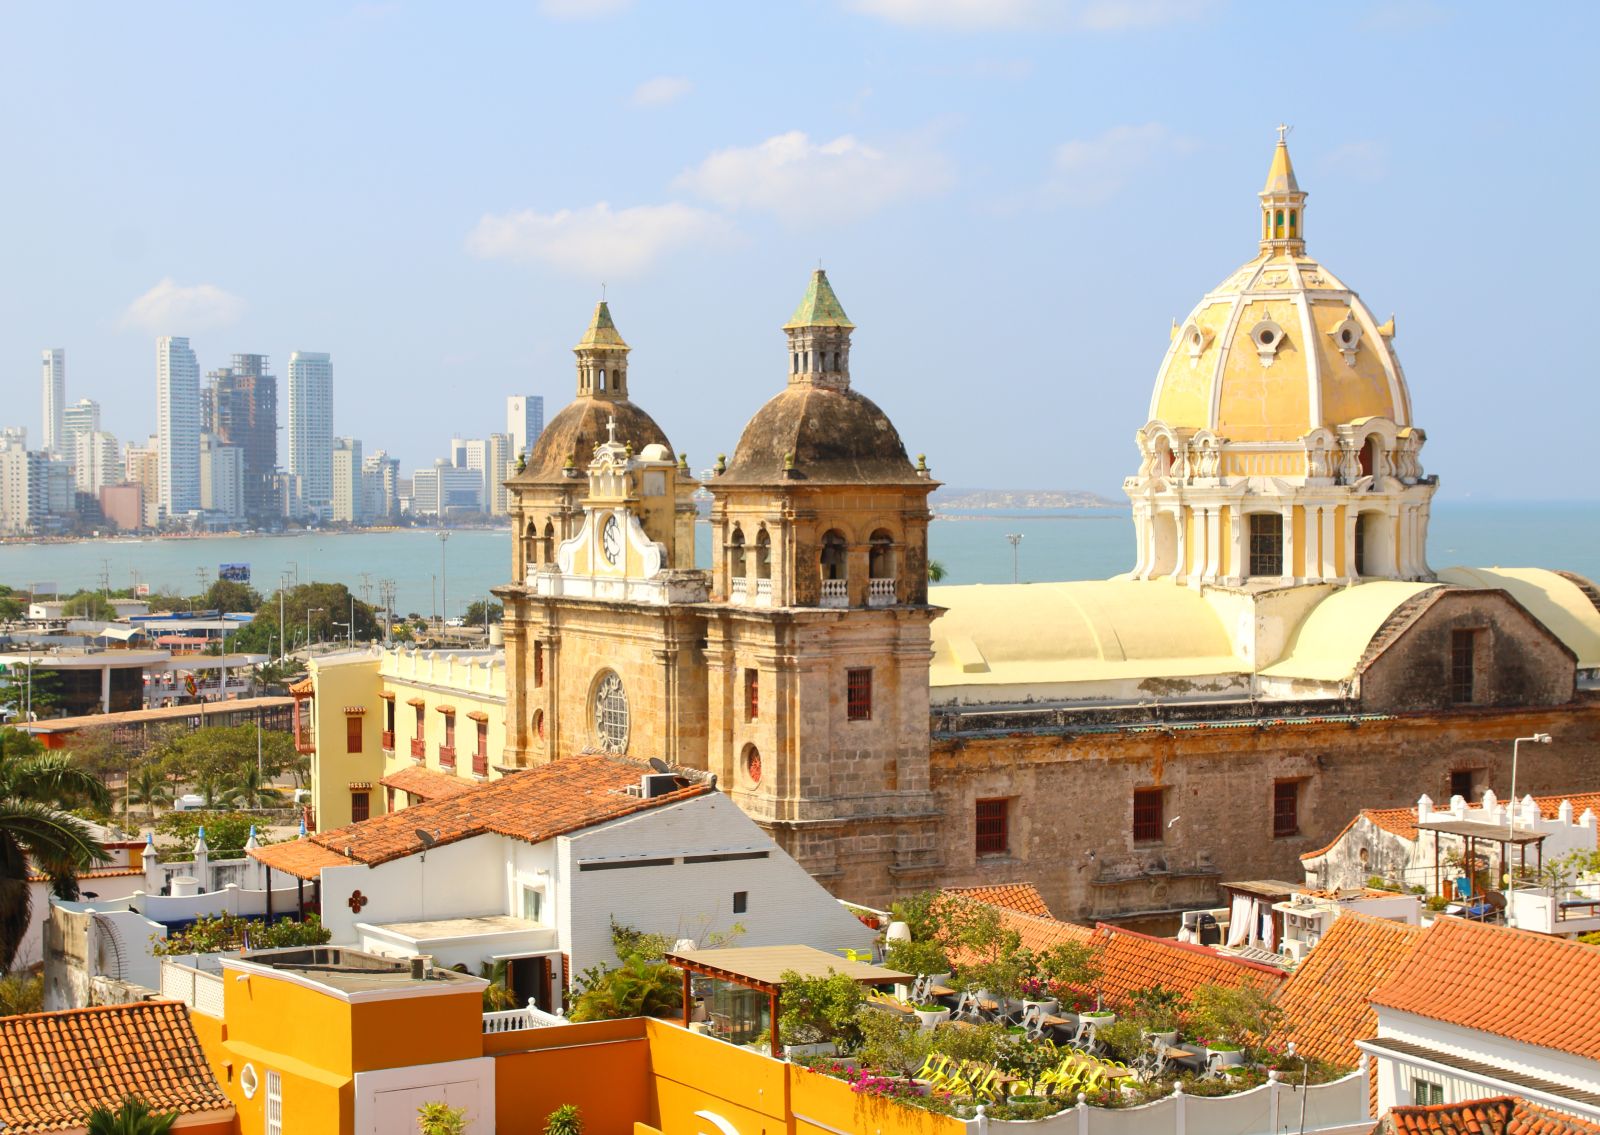 Church of St Peter Claver in Cartagena